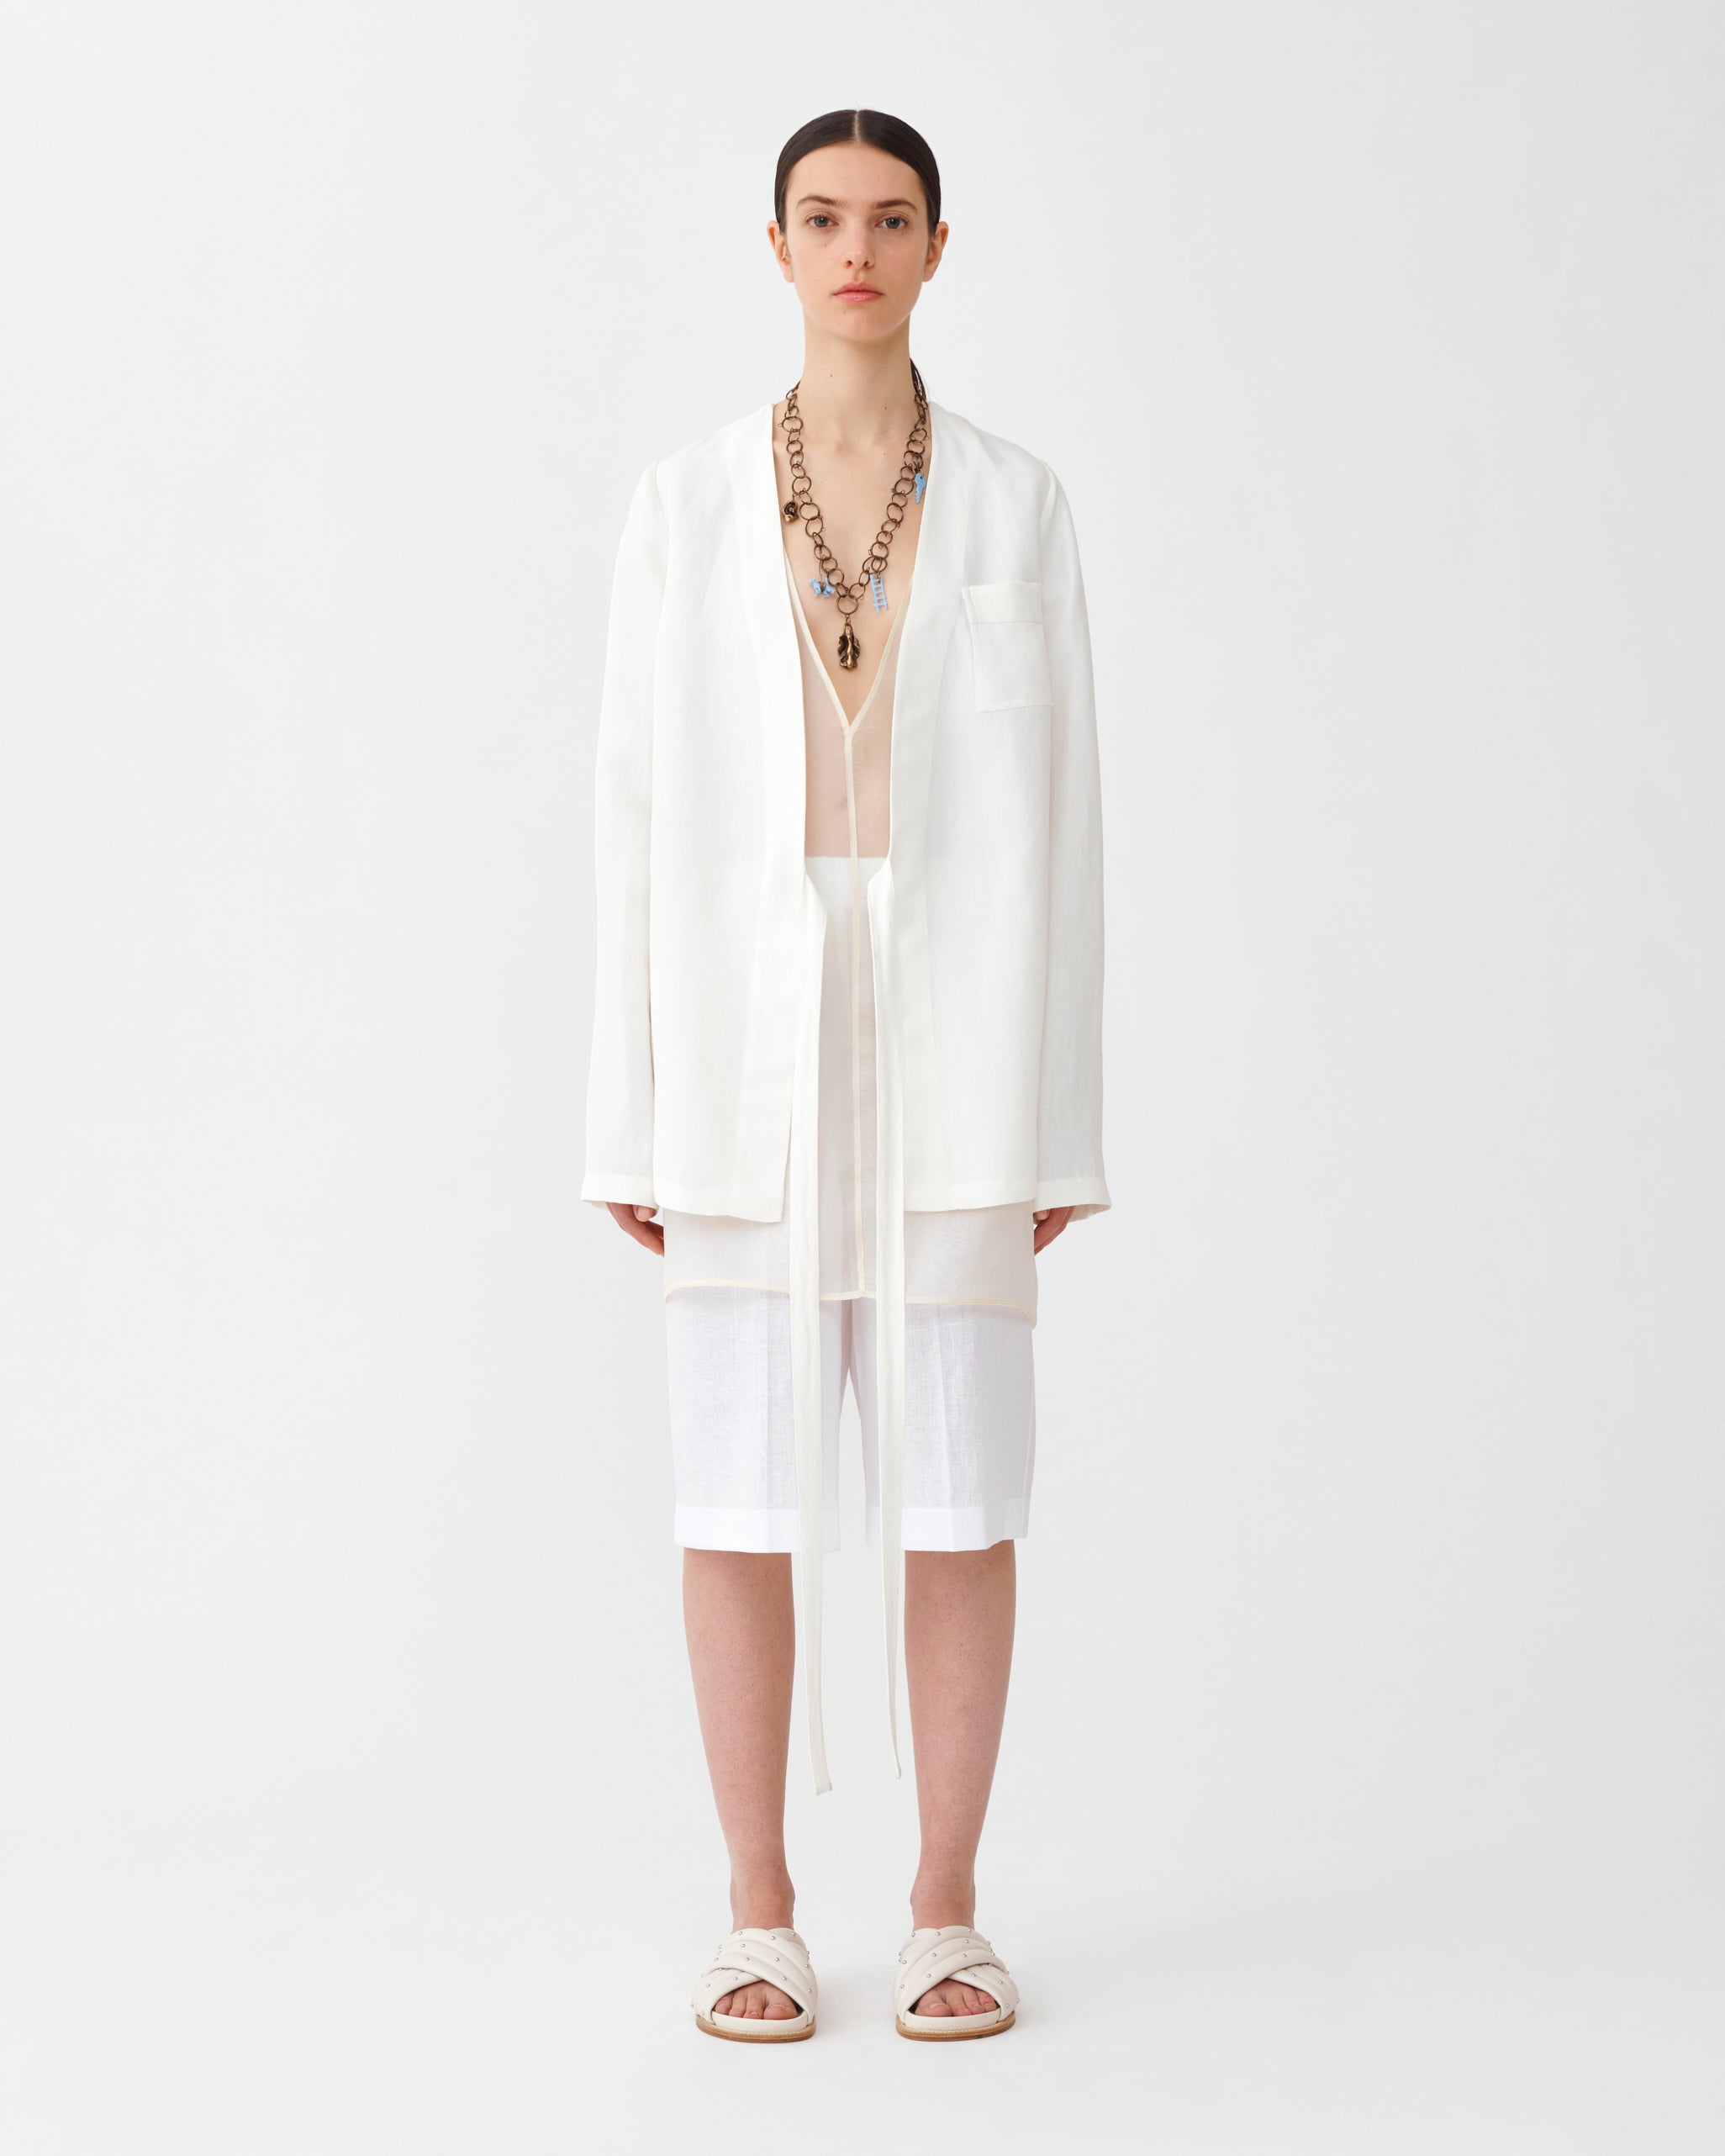 Viscose and linen jacket, white